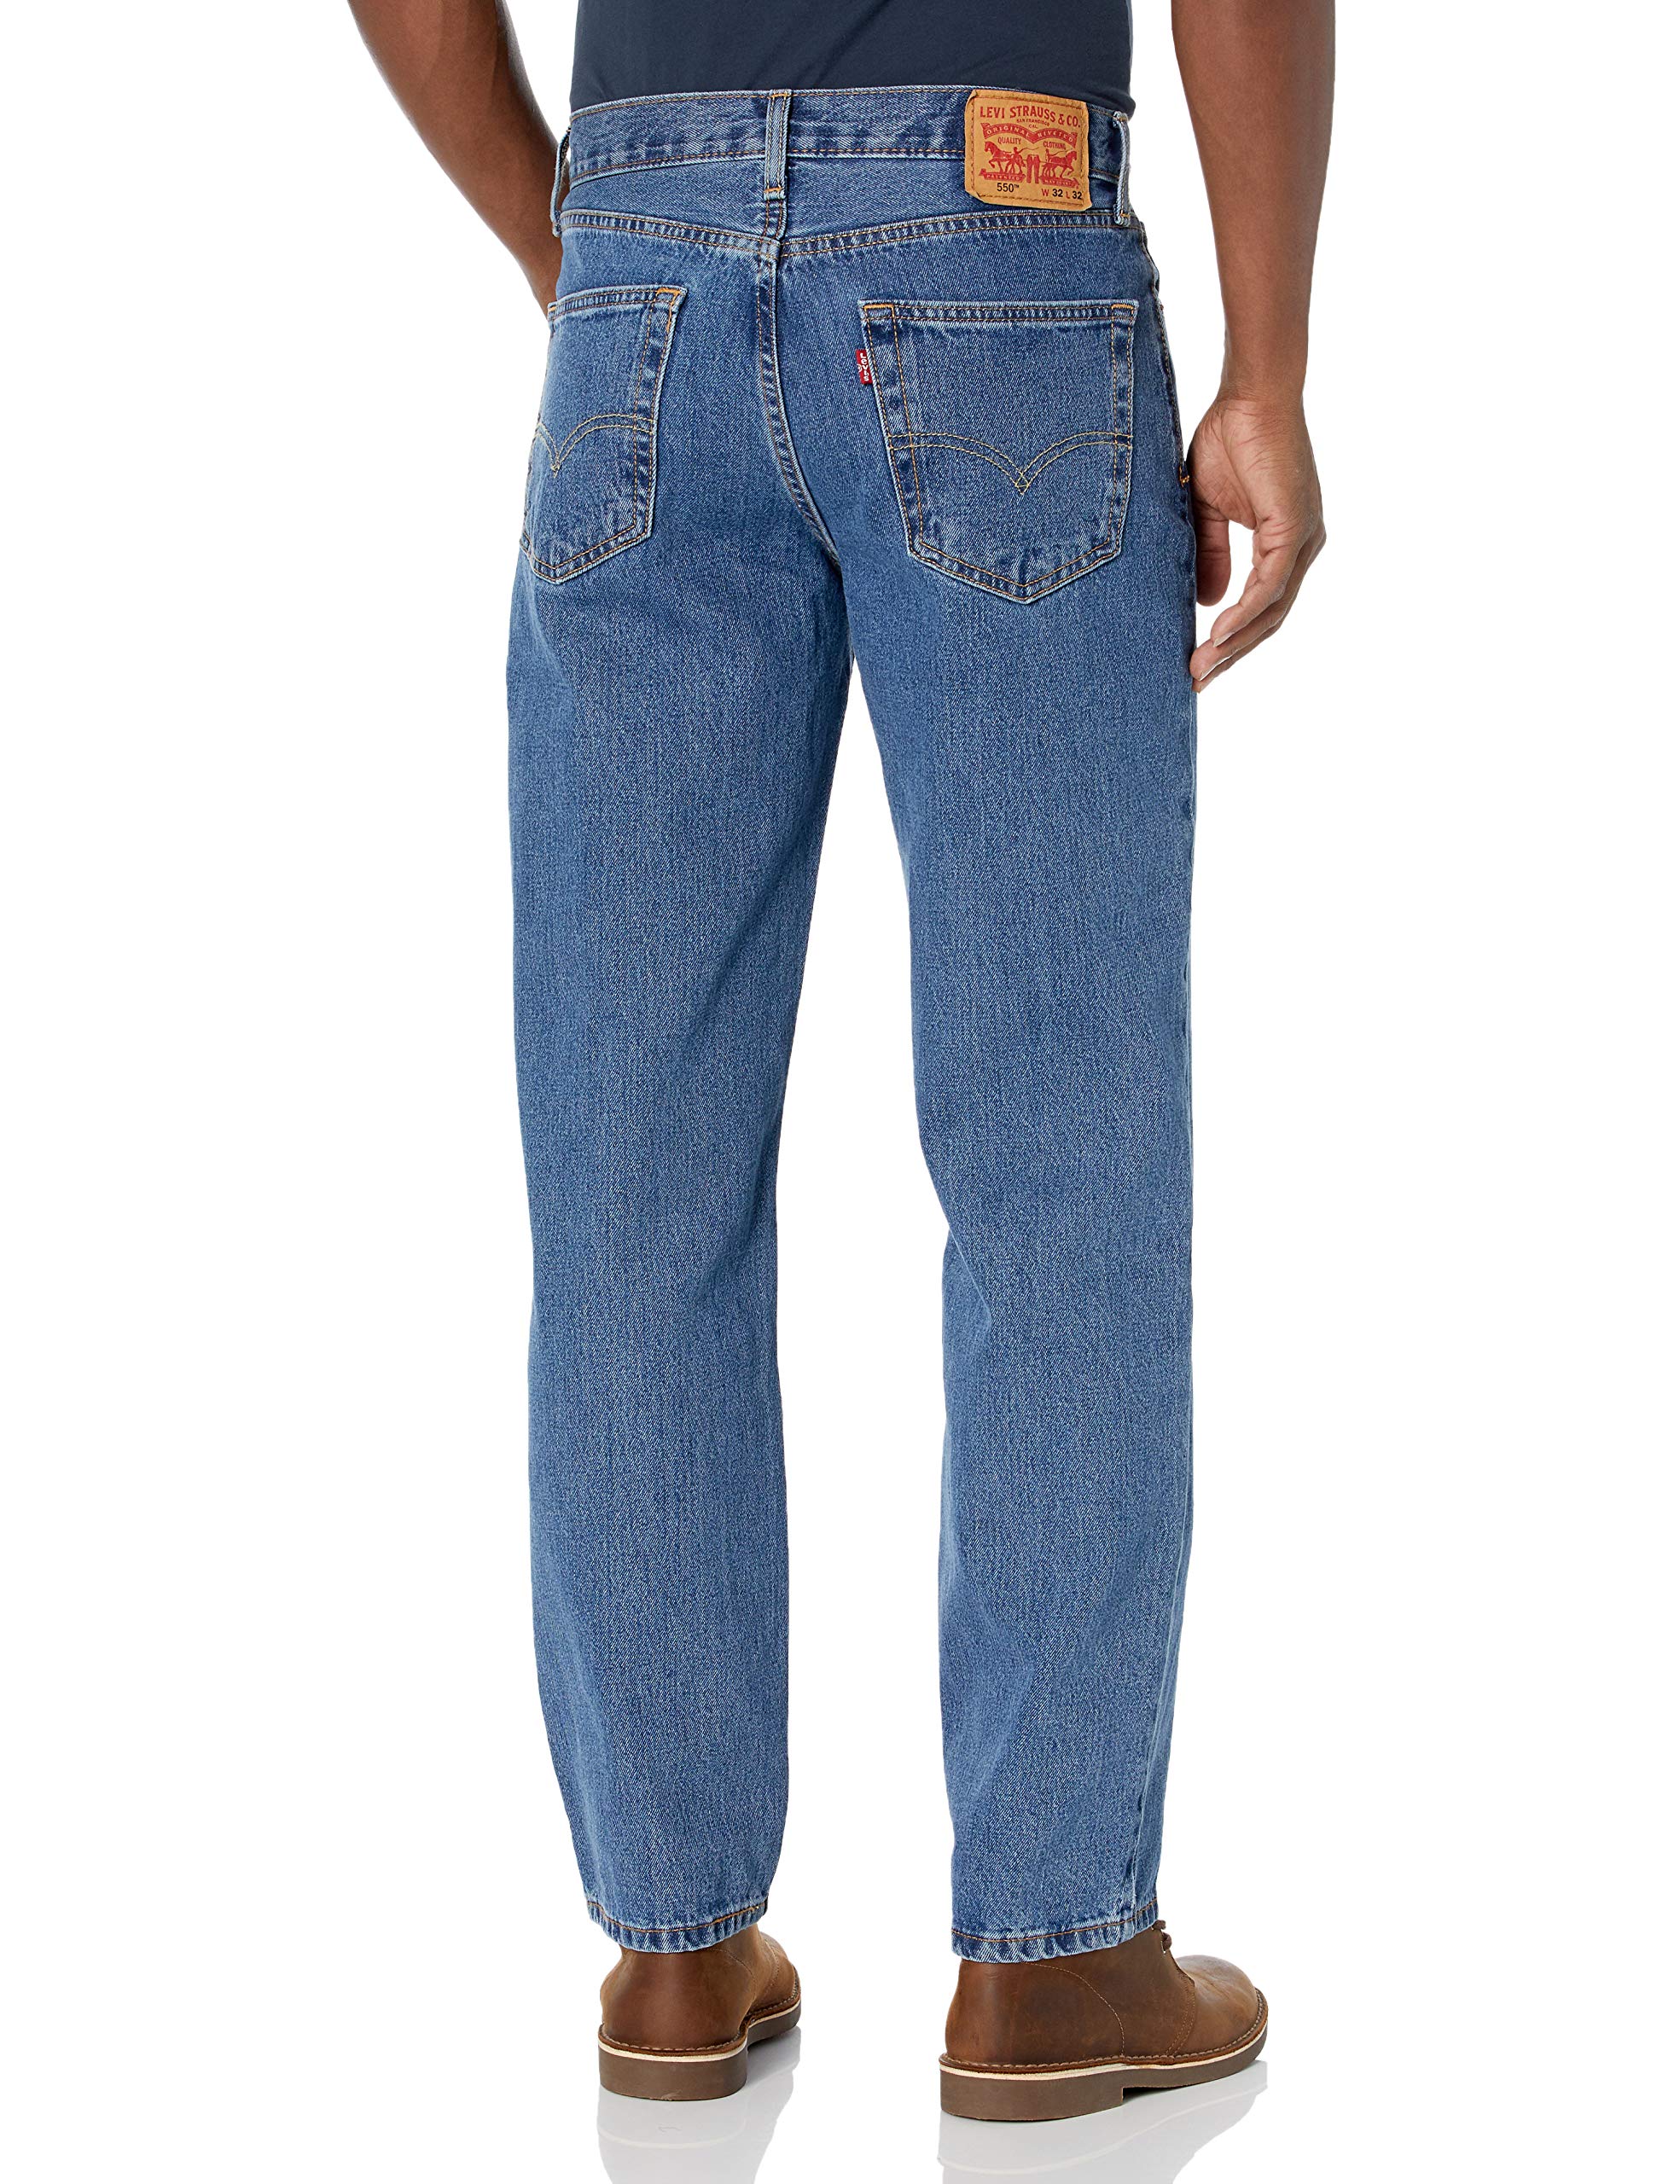 Levi's Men's 550 Relaxed Fit Jeans (Also Available in Big & Tall), Medium Stonewash, 34W x 32L